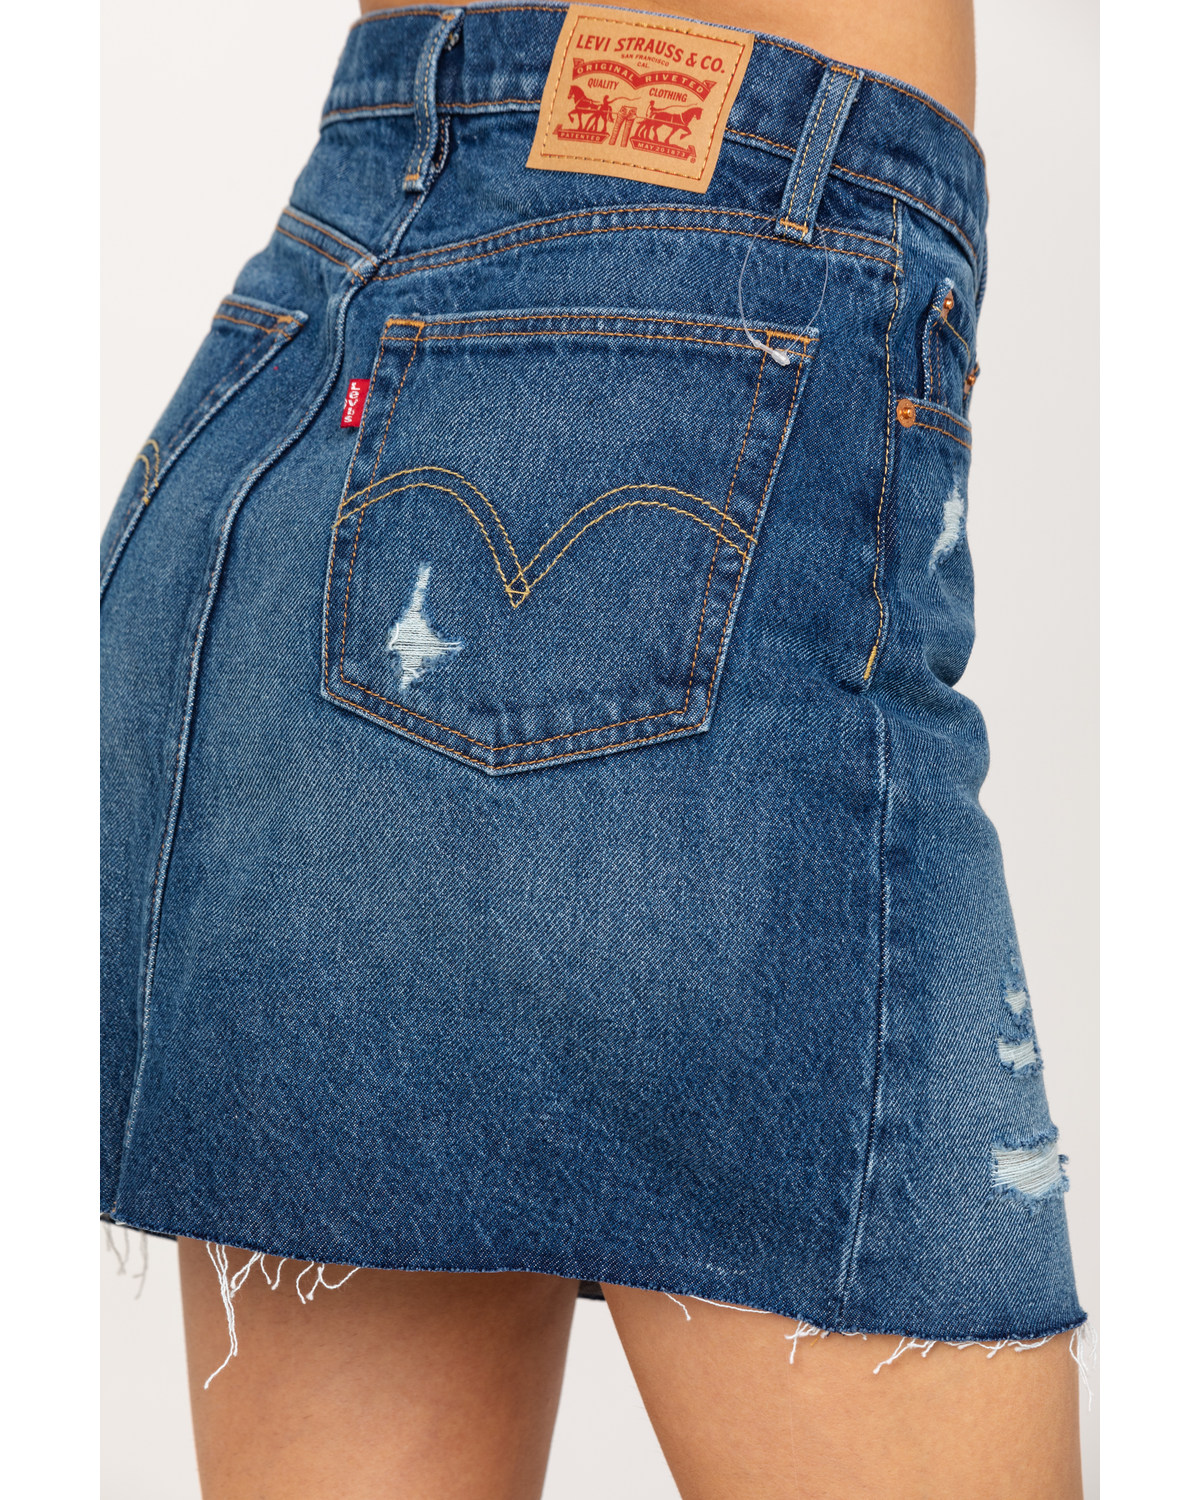 Levi’s Women's High-Waisted Deconstructed Iconic Skirt | Boot Barn